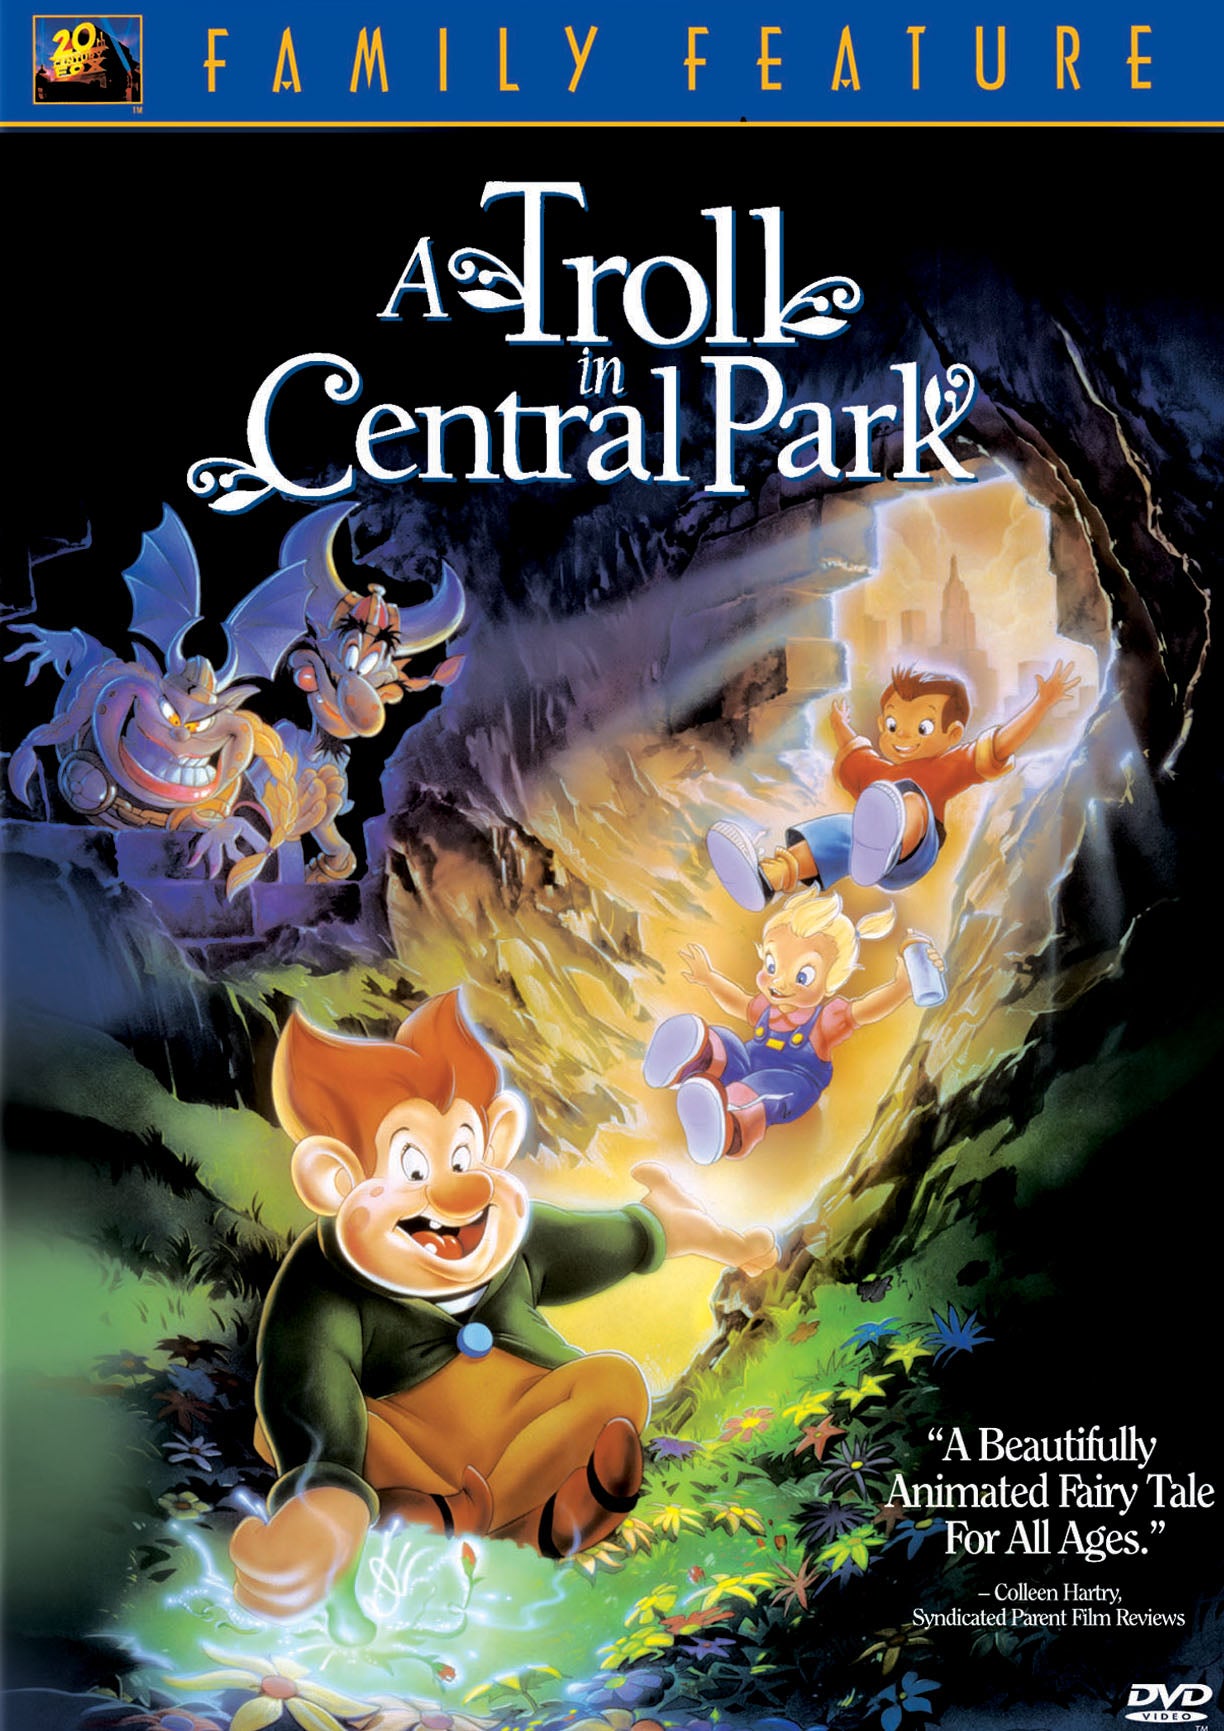 Troll in Central Park cover art